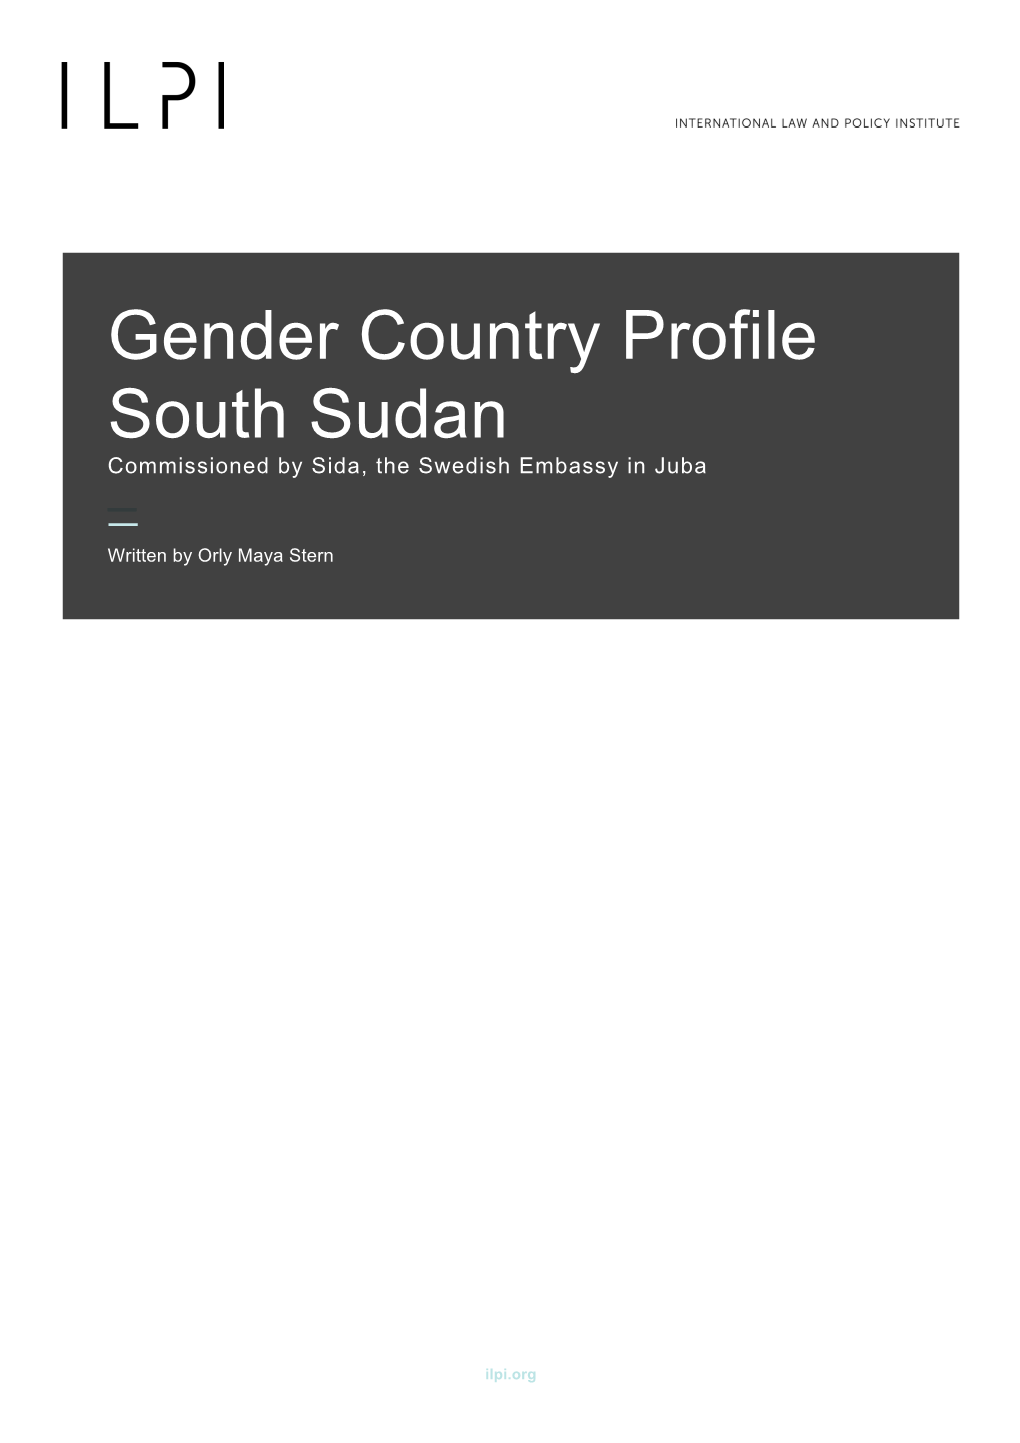 Gender Country Profile South Sudan Commissioned by Sida, the Swedish Embassy in Juba